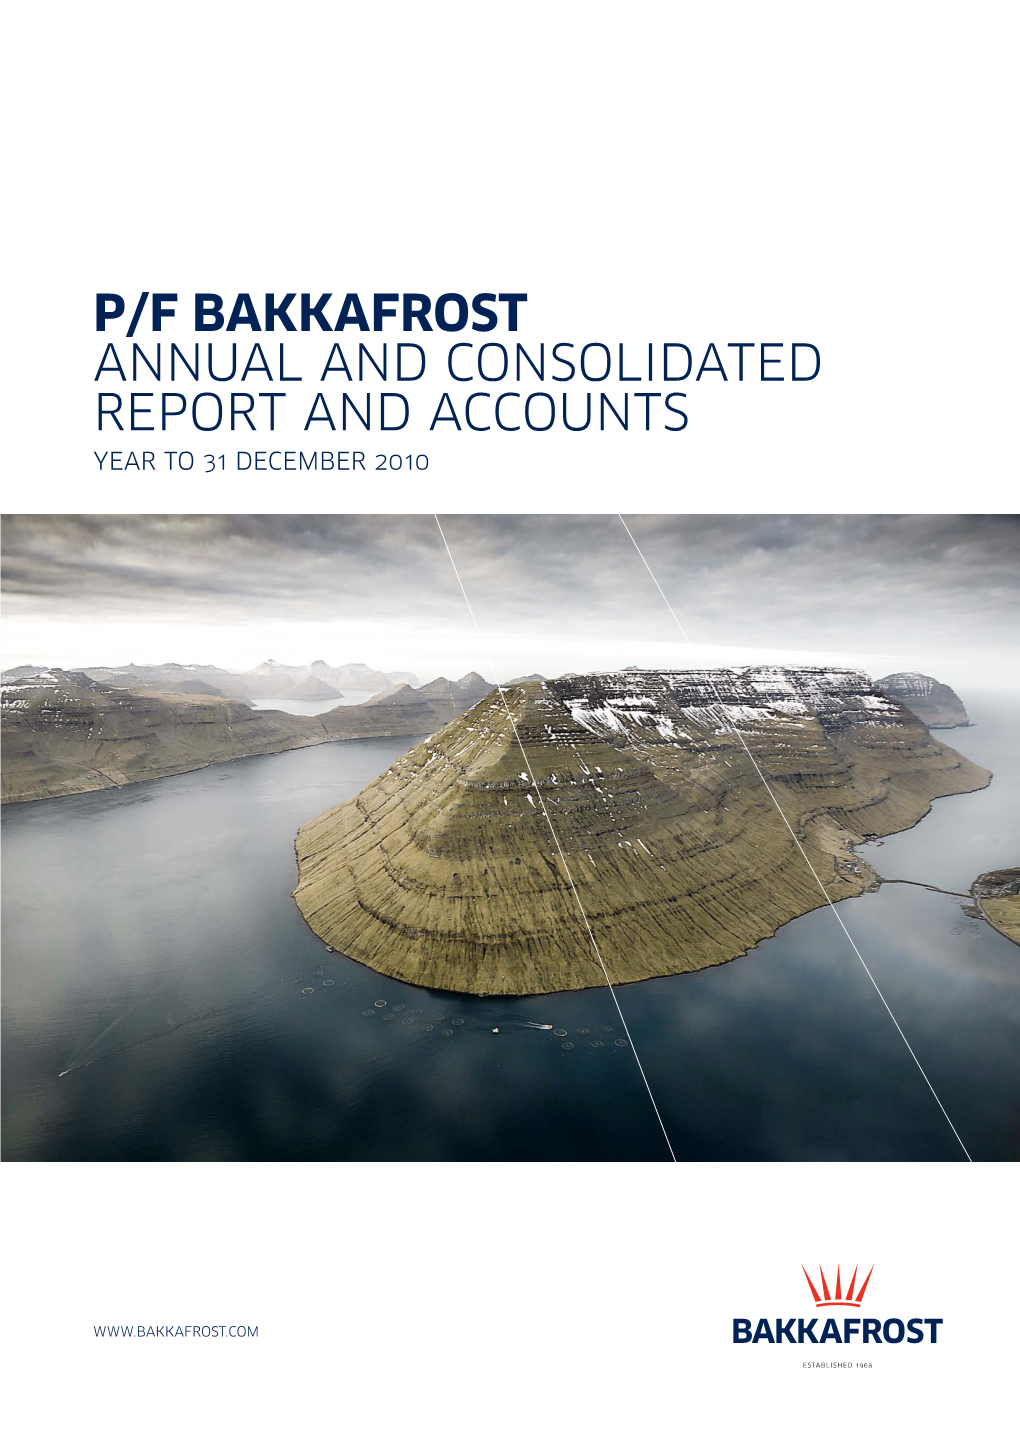 P/F Bakkafrost Annual and Consolidated Report and Accounts Year to 31 December 2010